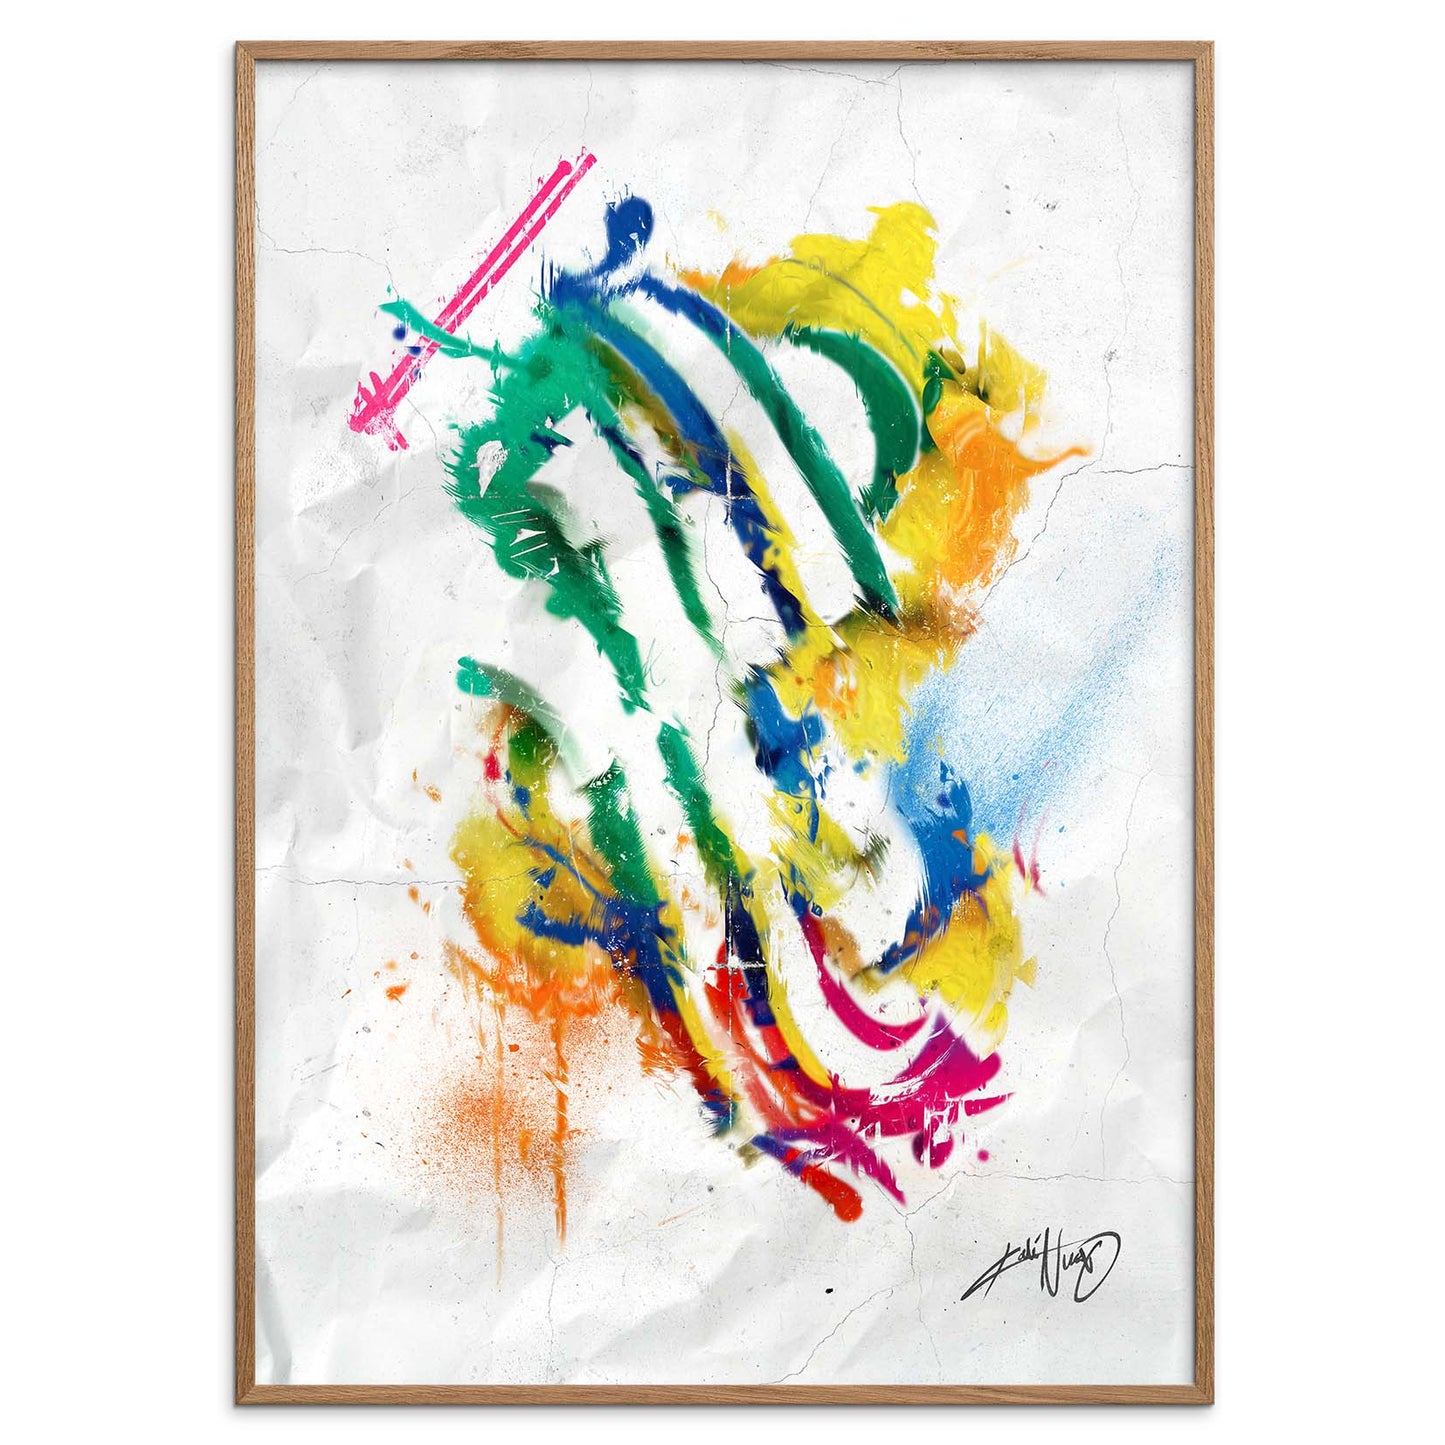 colorful abstract art poster in a wooden frame on a white background